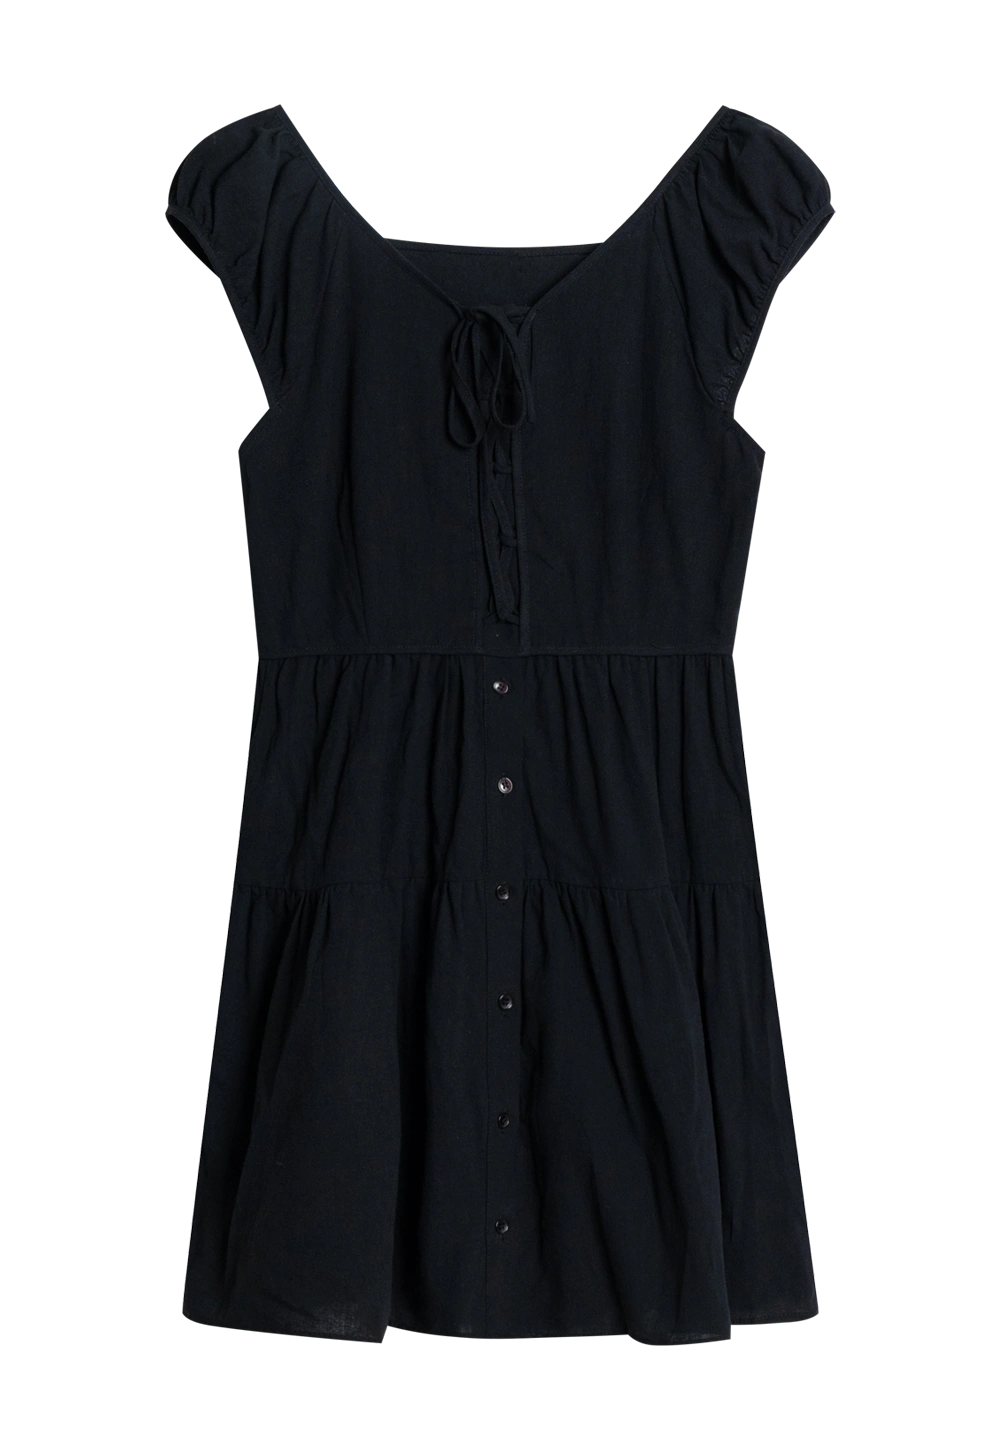 Women's Tie-Front V-Neck Dress with Ruffled Sleeves - Casual Summer Style